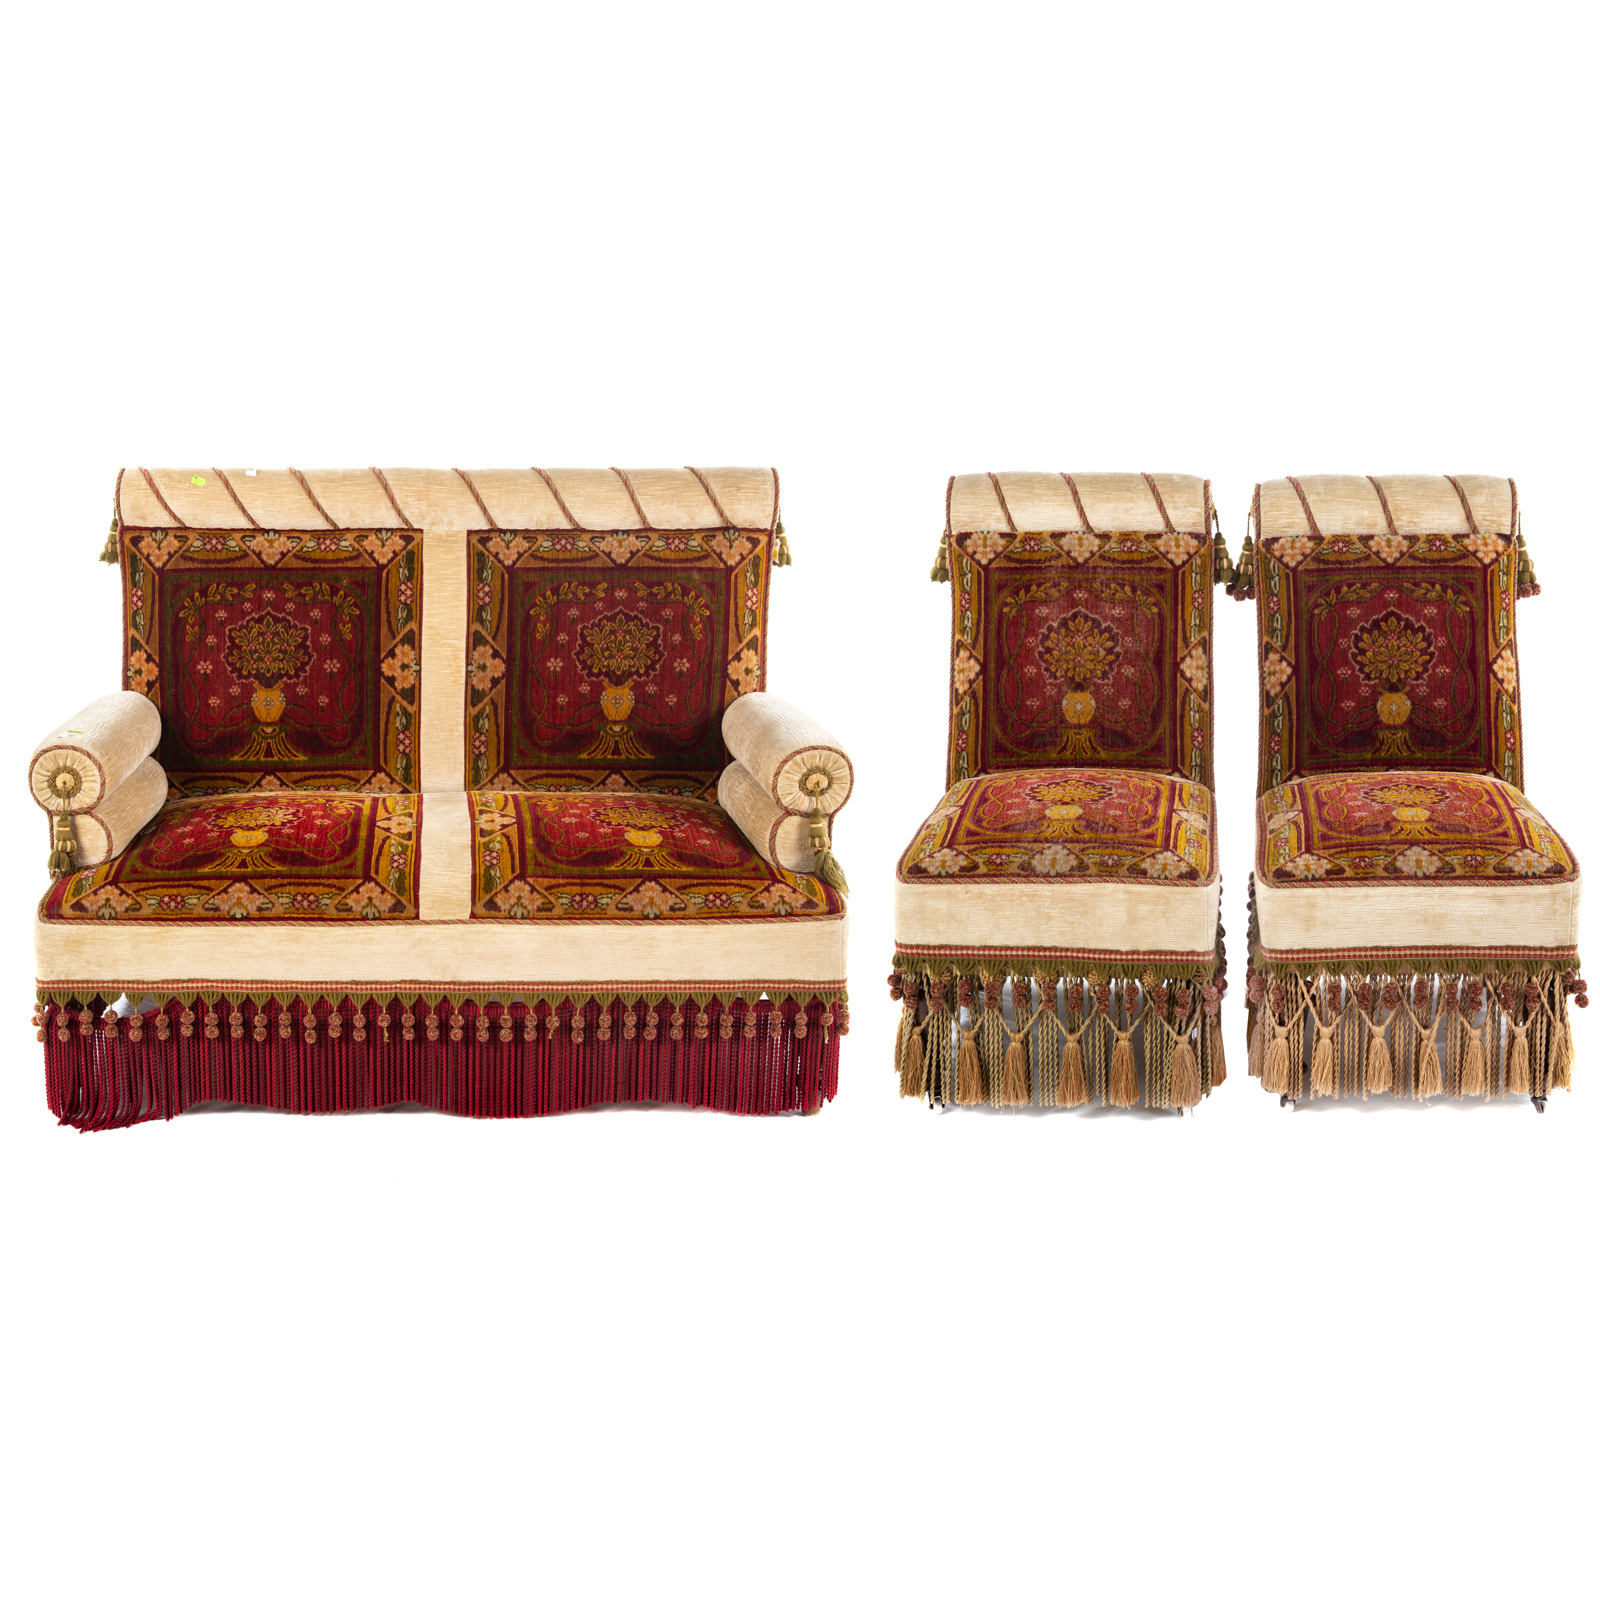 VICTORIAN STYLE UPHOLSTERED PARLOR